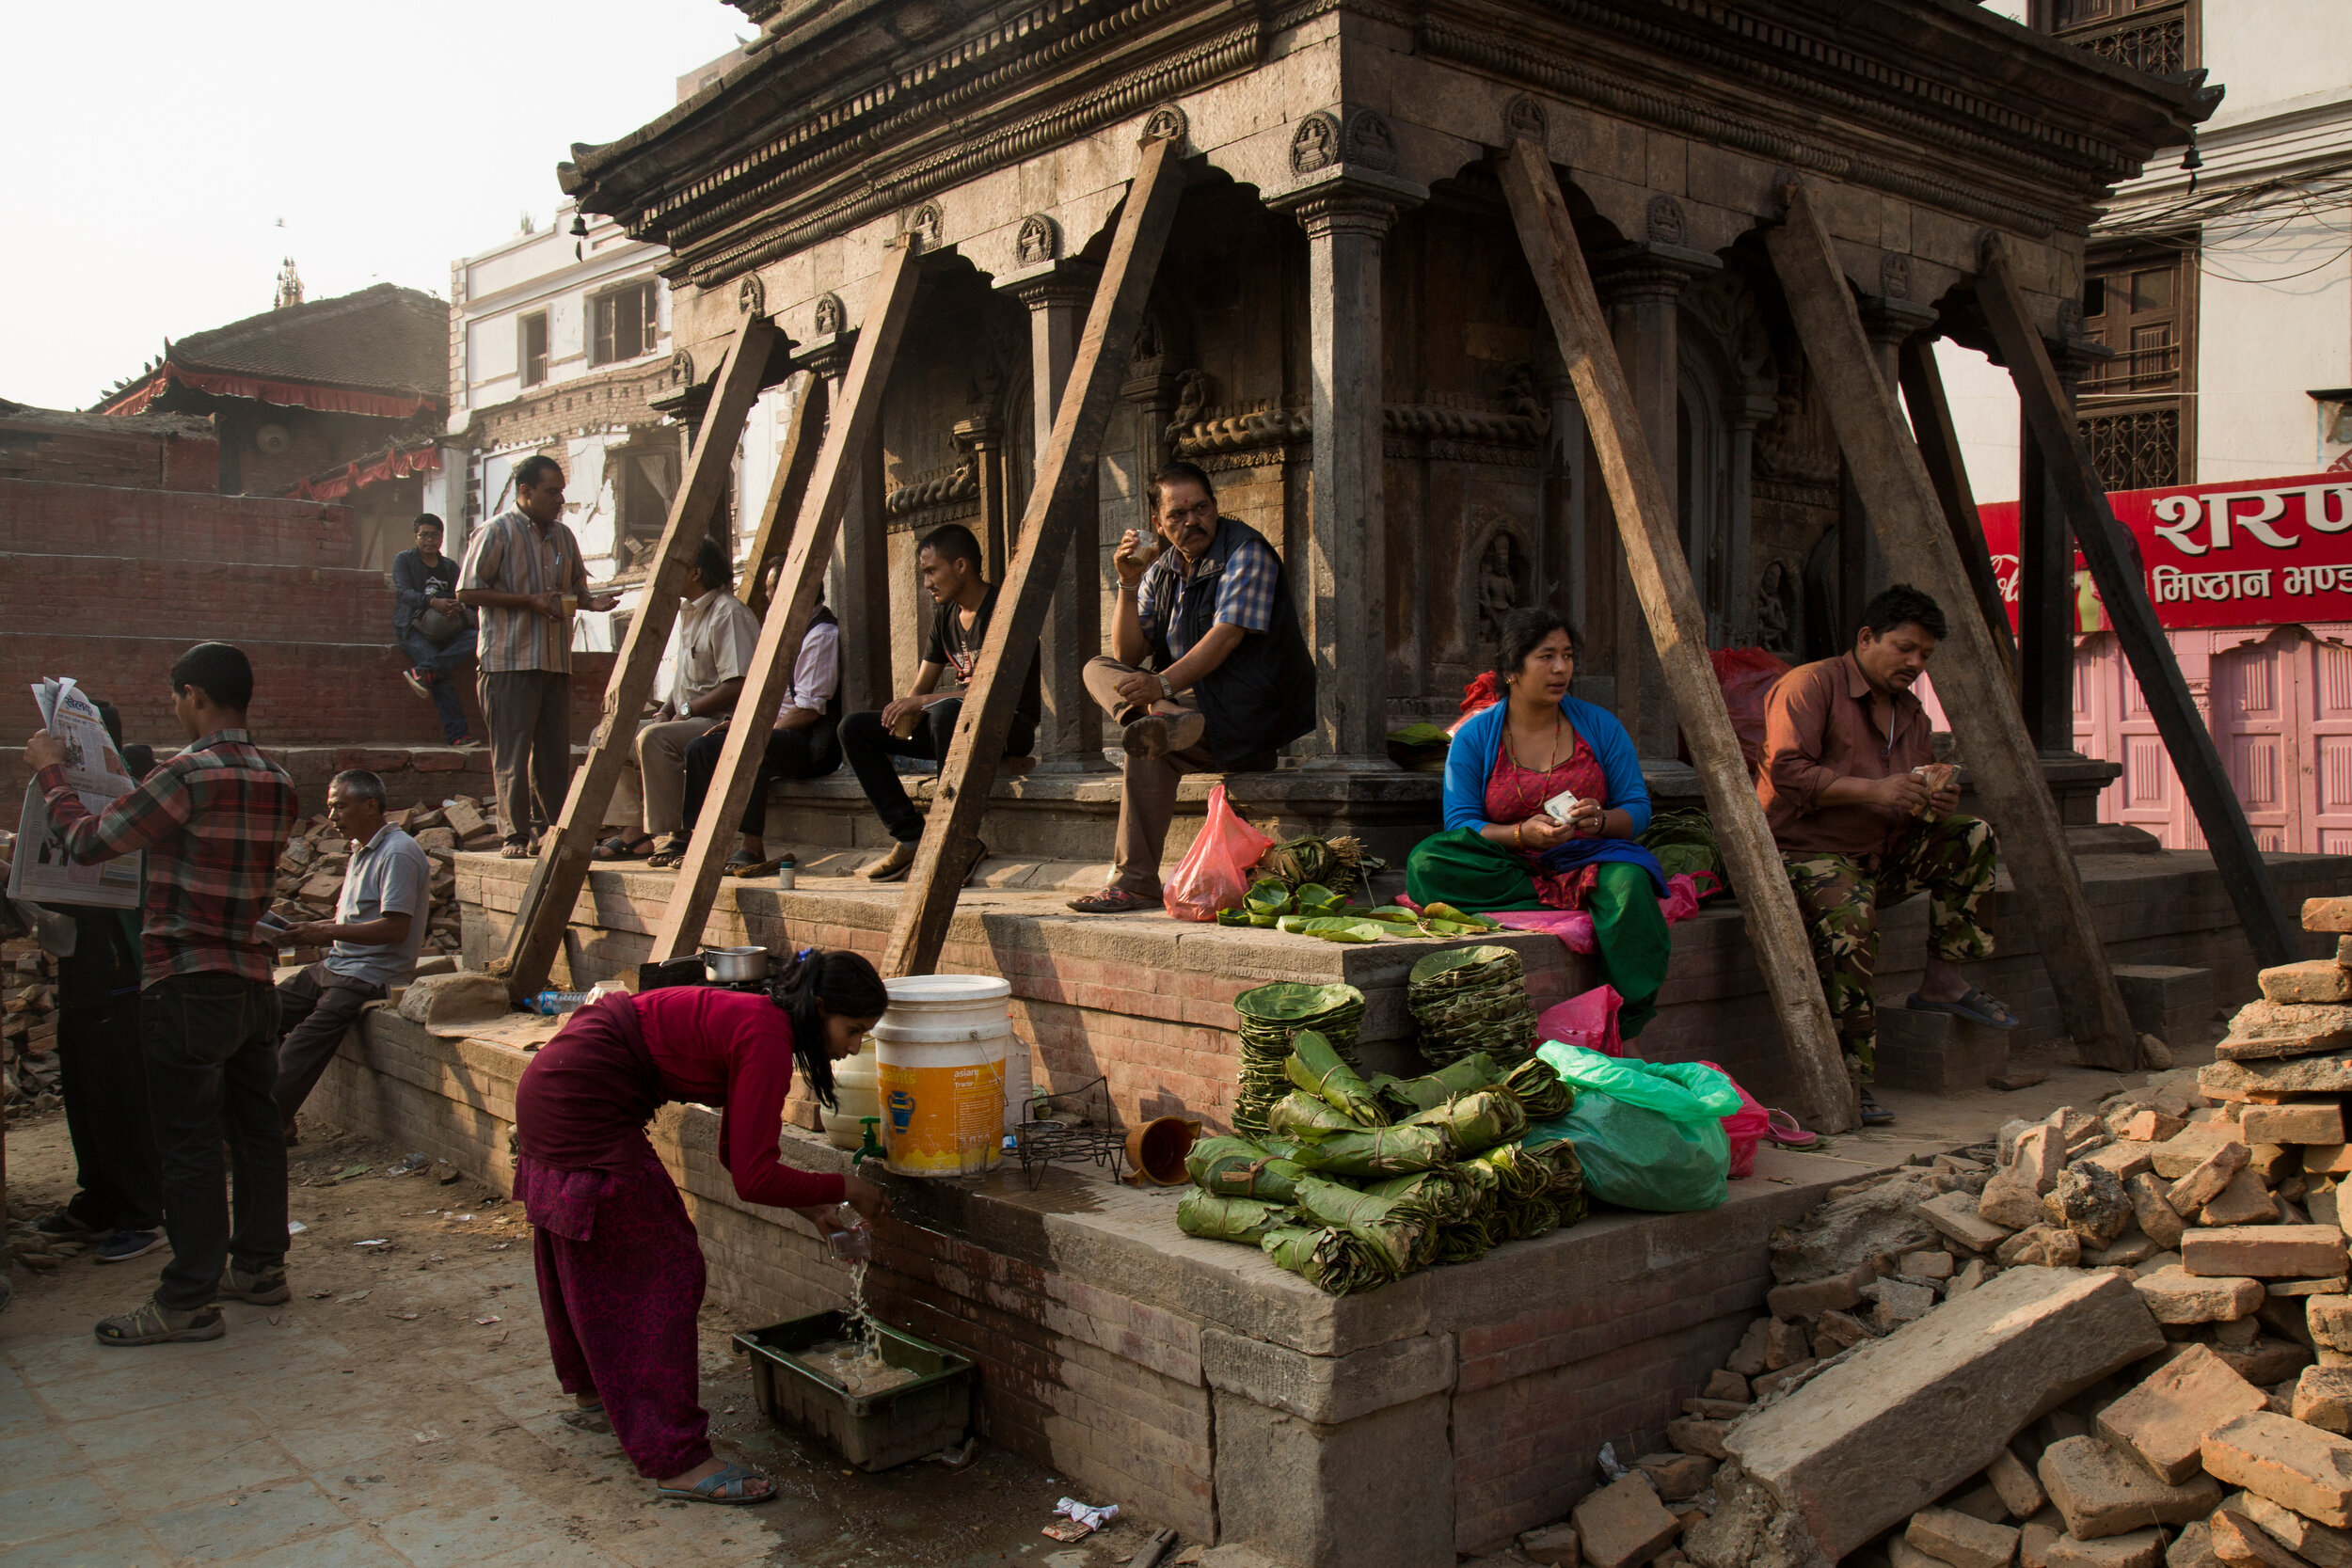  Daily life in the Durbar Square area in Kathmandu on May 2015, a month after a 7.8 magnitude earthquake struck Nepal. 